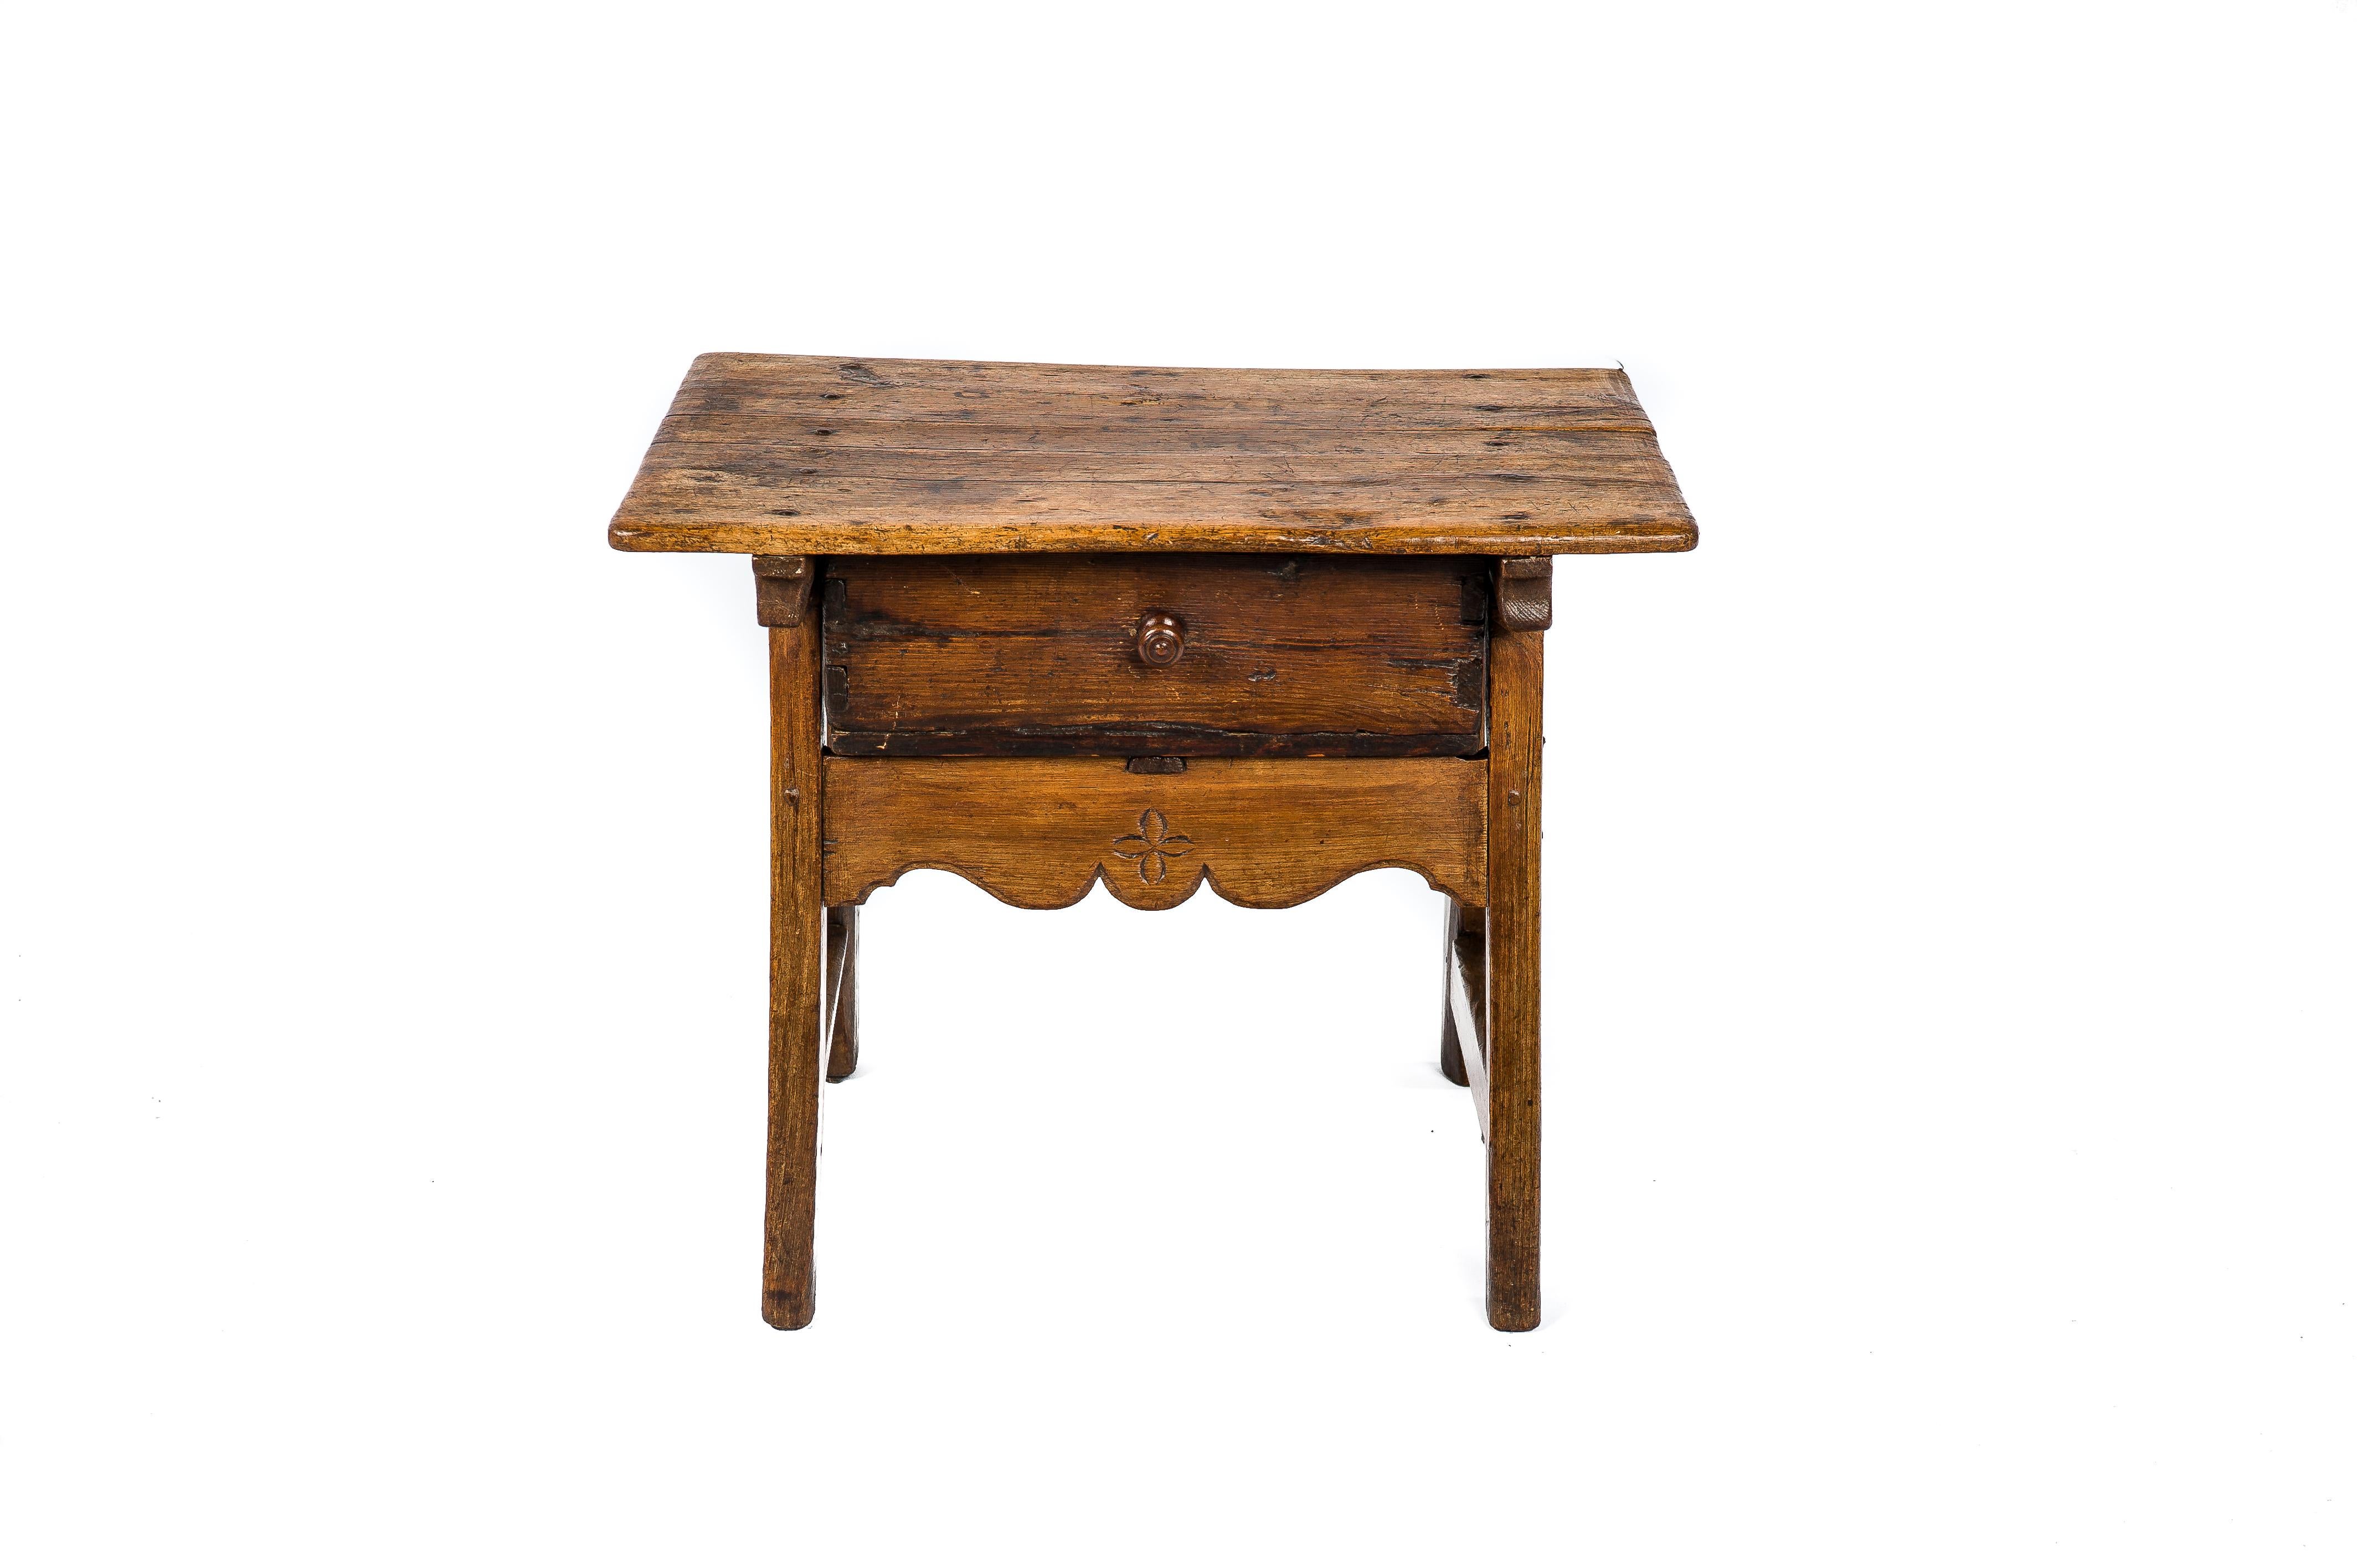 A beautiful antique side table that was made in provincial Spain circa 1750. The solid chestnut three planks rectangular top was jointed to the base by forged steel nails. The table features a single pine drawer with wooden with a curved apron